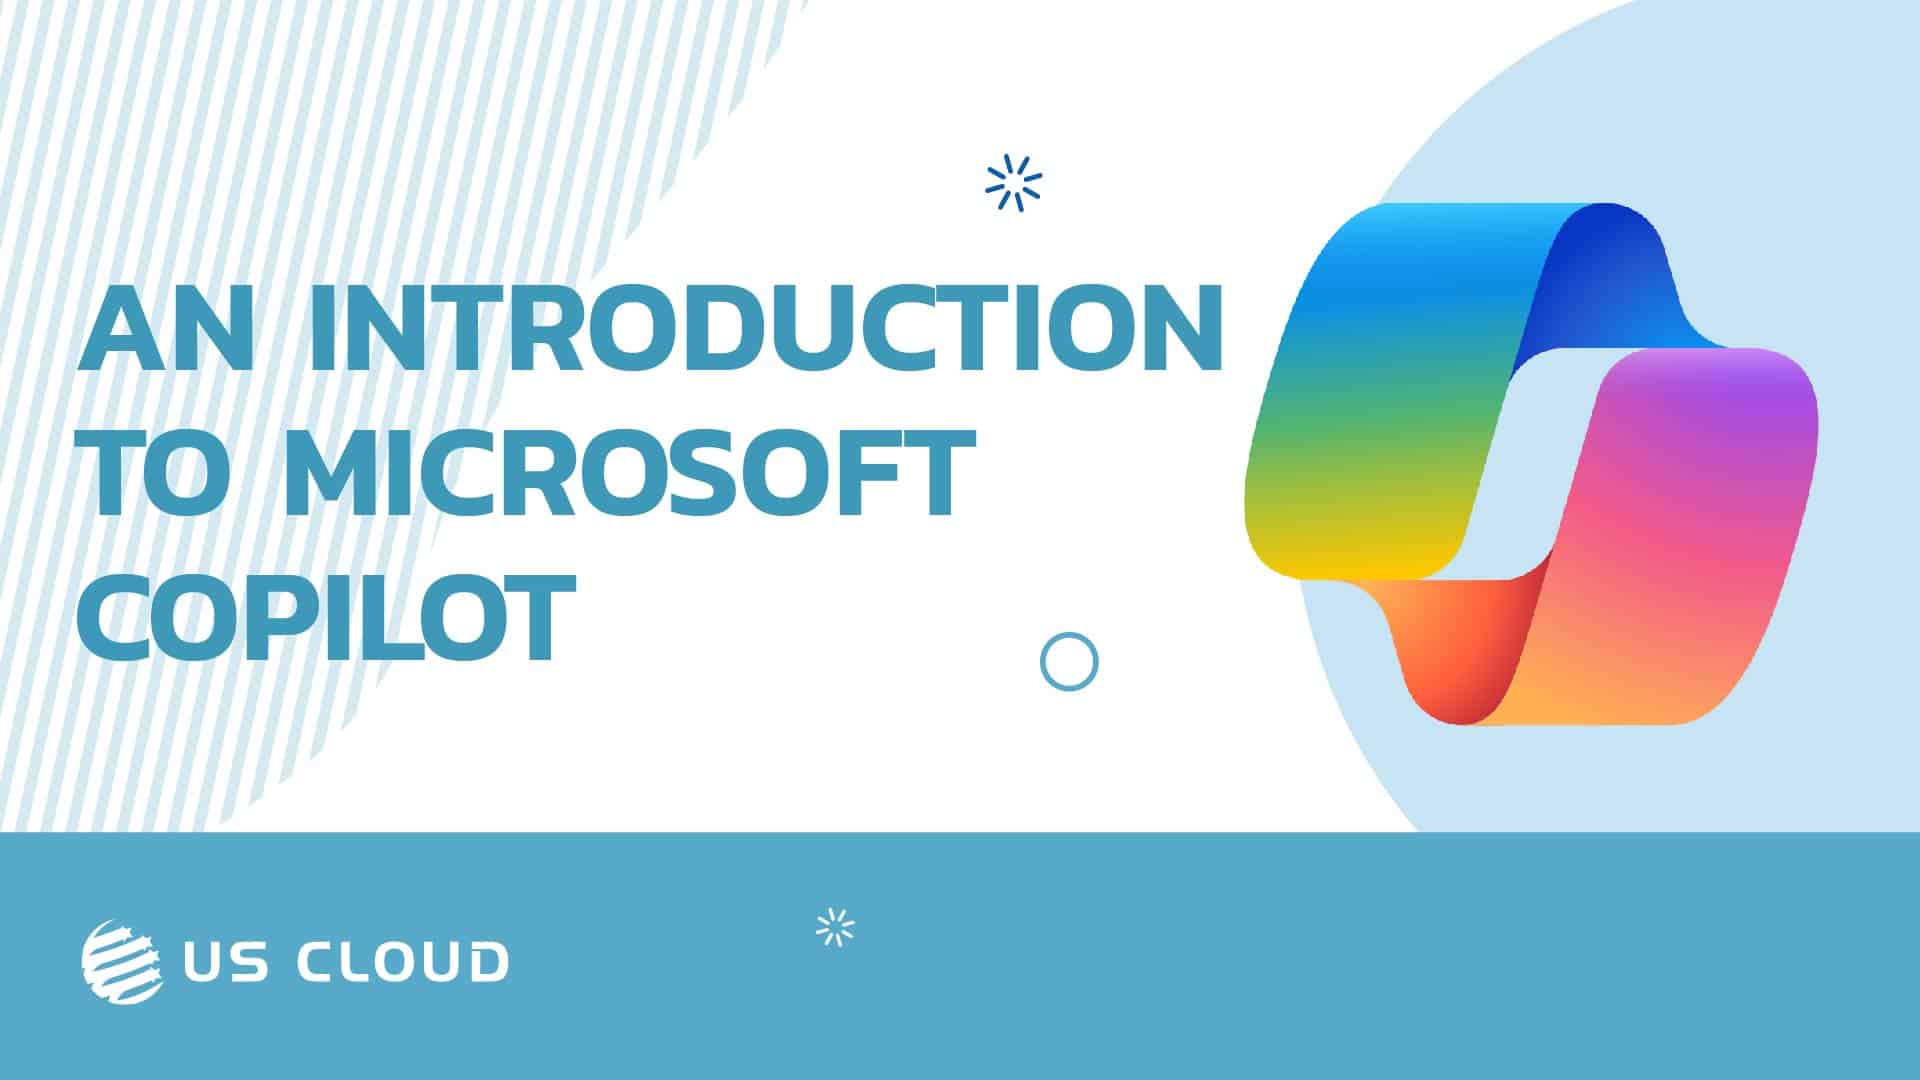 An Introduction to Microsoft Copilot